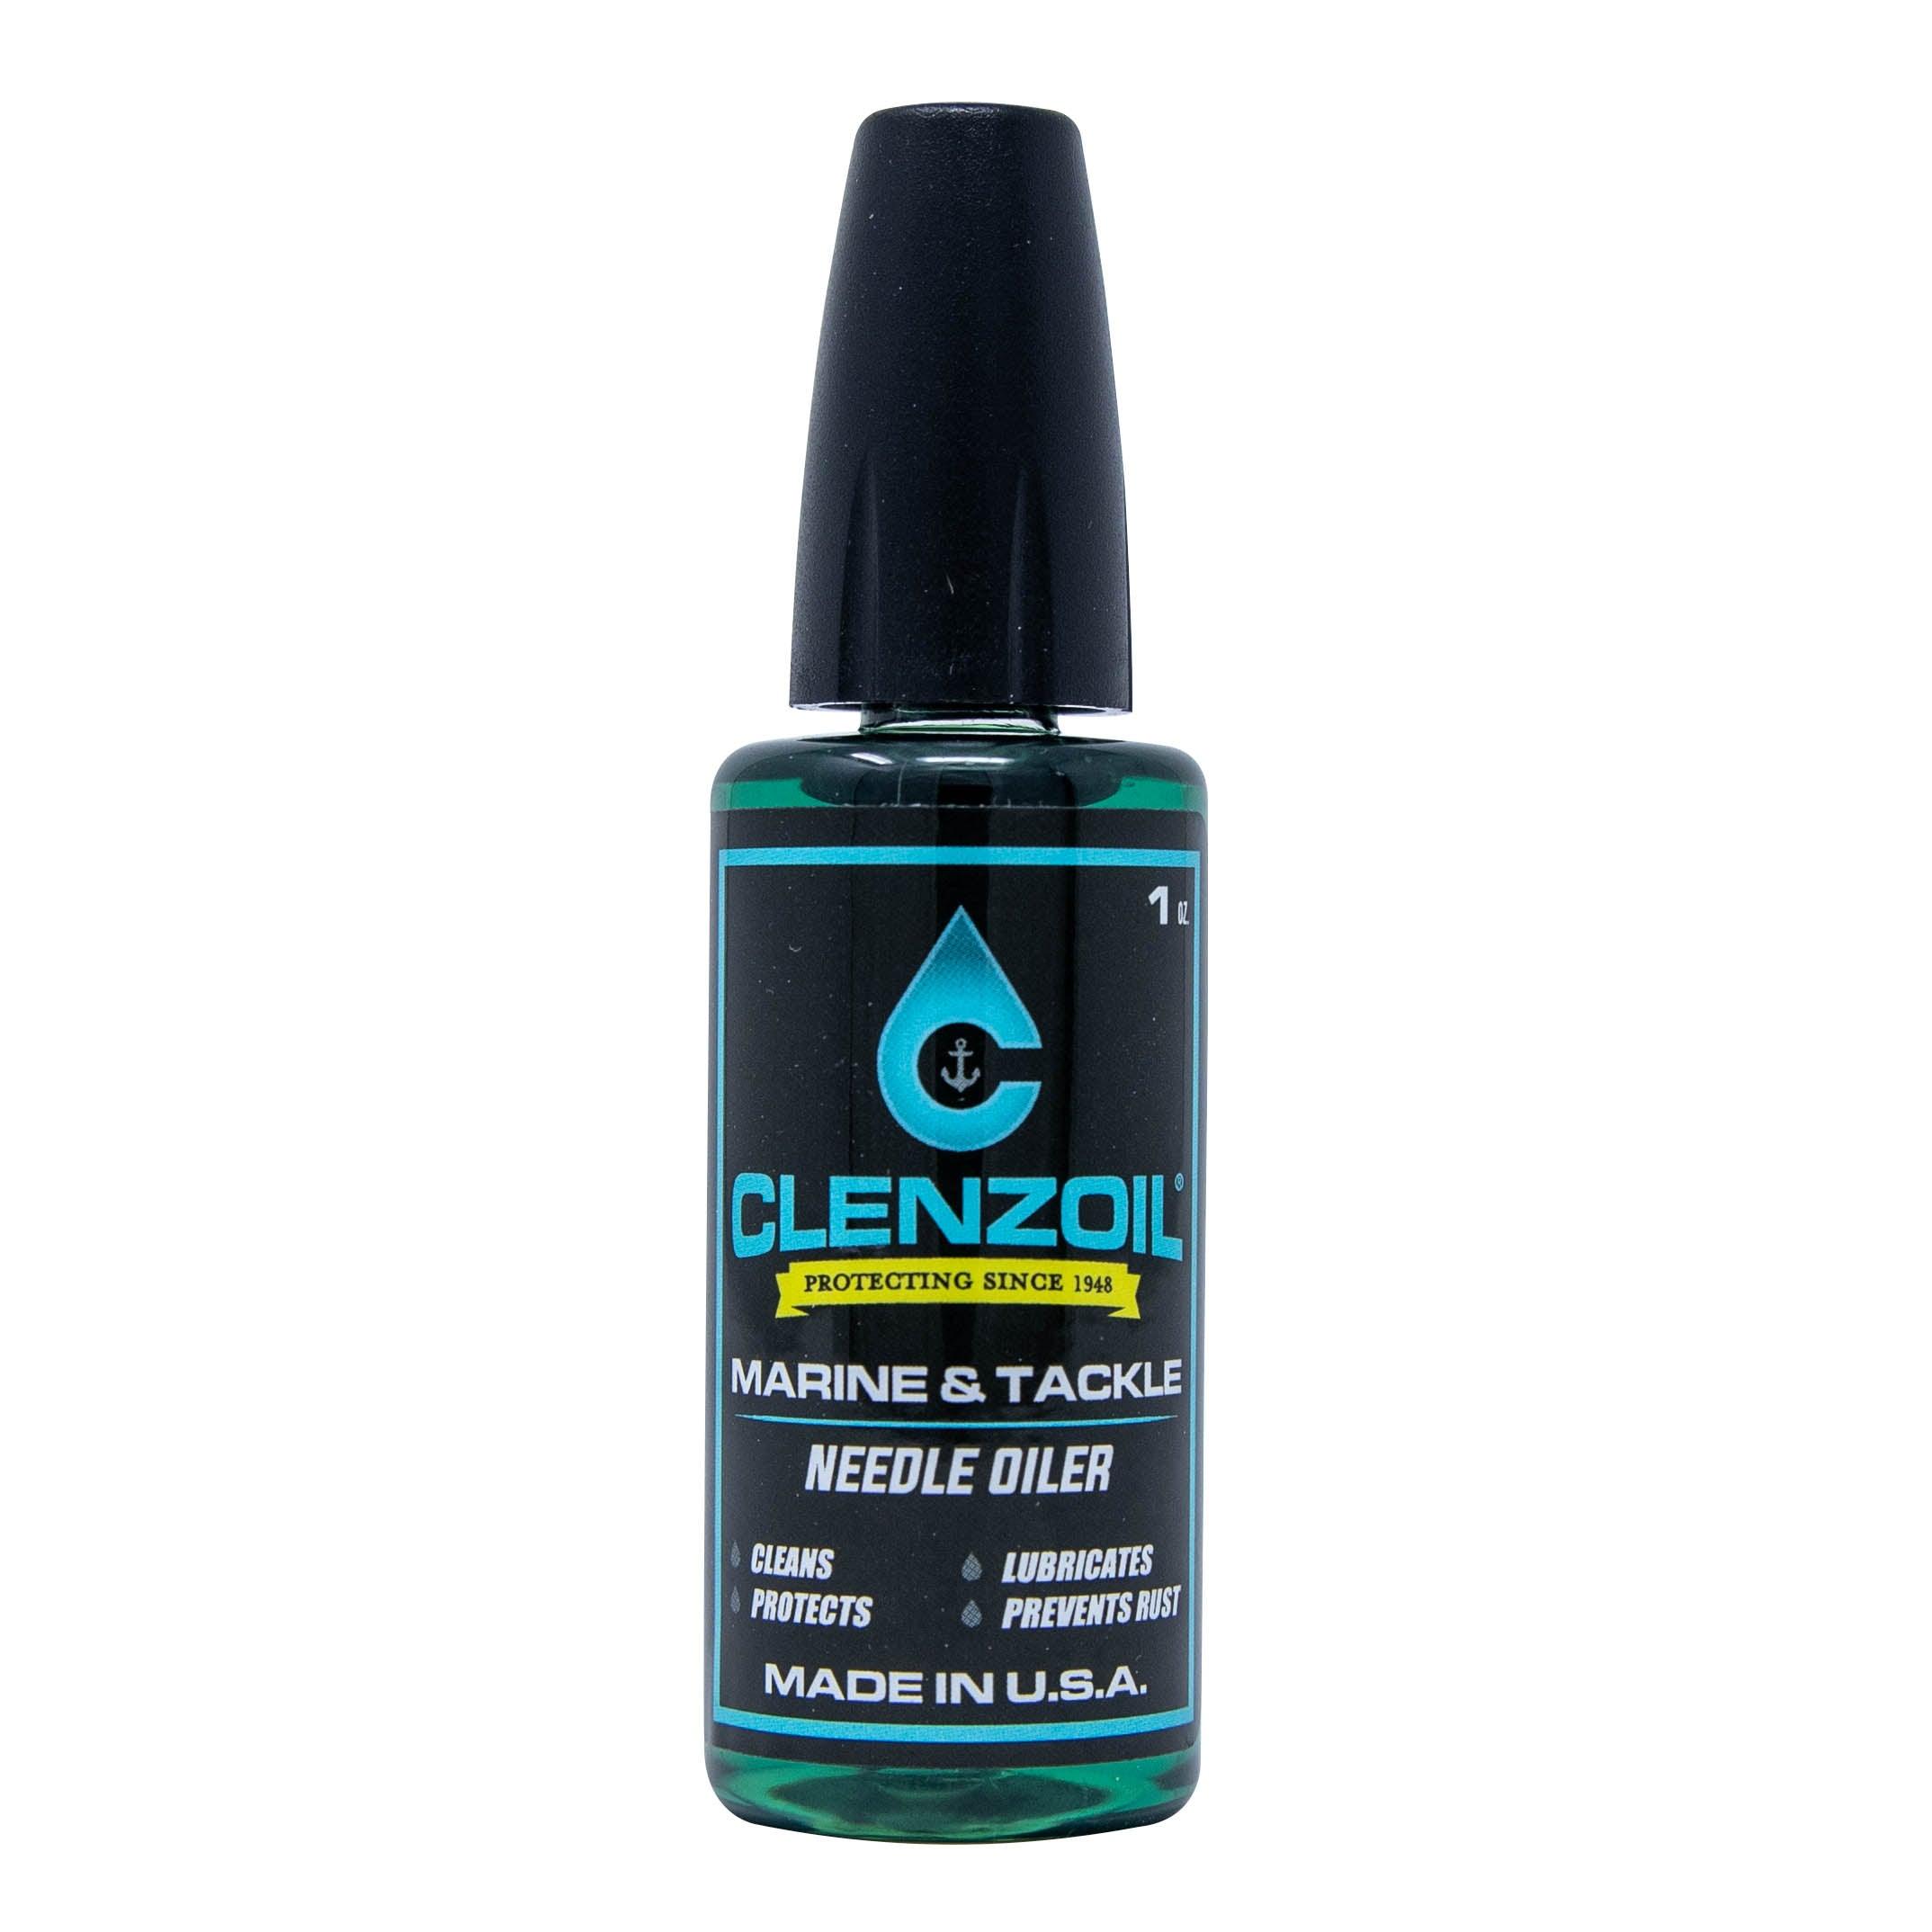 Marine & Tackle 1 oz. Needle Oiler - Clenzoil Unlimited